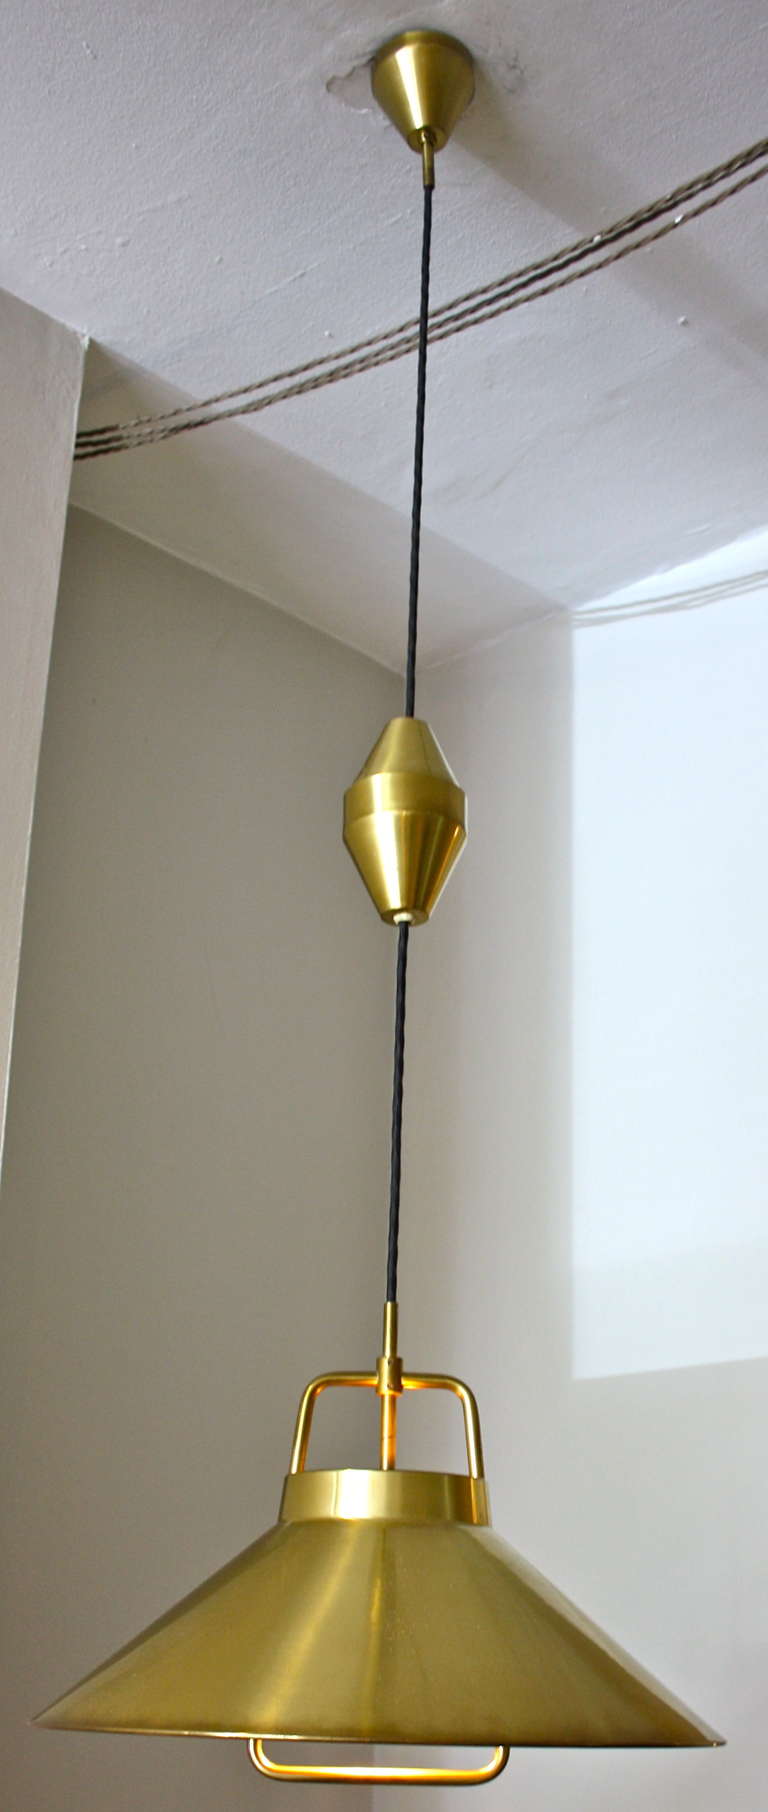 Great rise and fall brass pendant light by Frits Schegel. Schegel worked for Wilhelm Lauritzen and is thought to be the designer behind some of the fantastic lights emerging from the studio in the 1940s